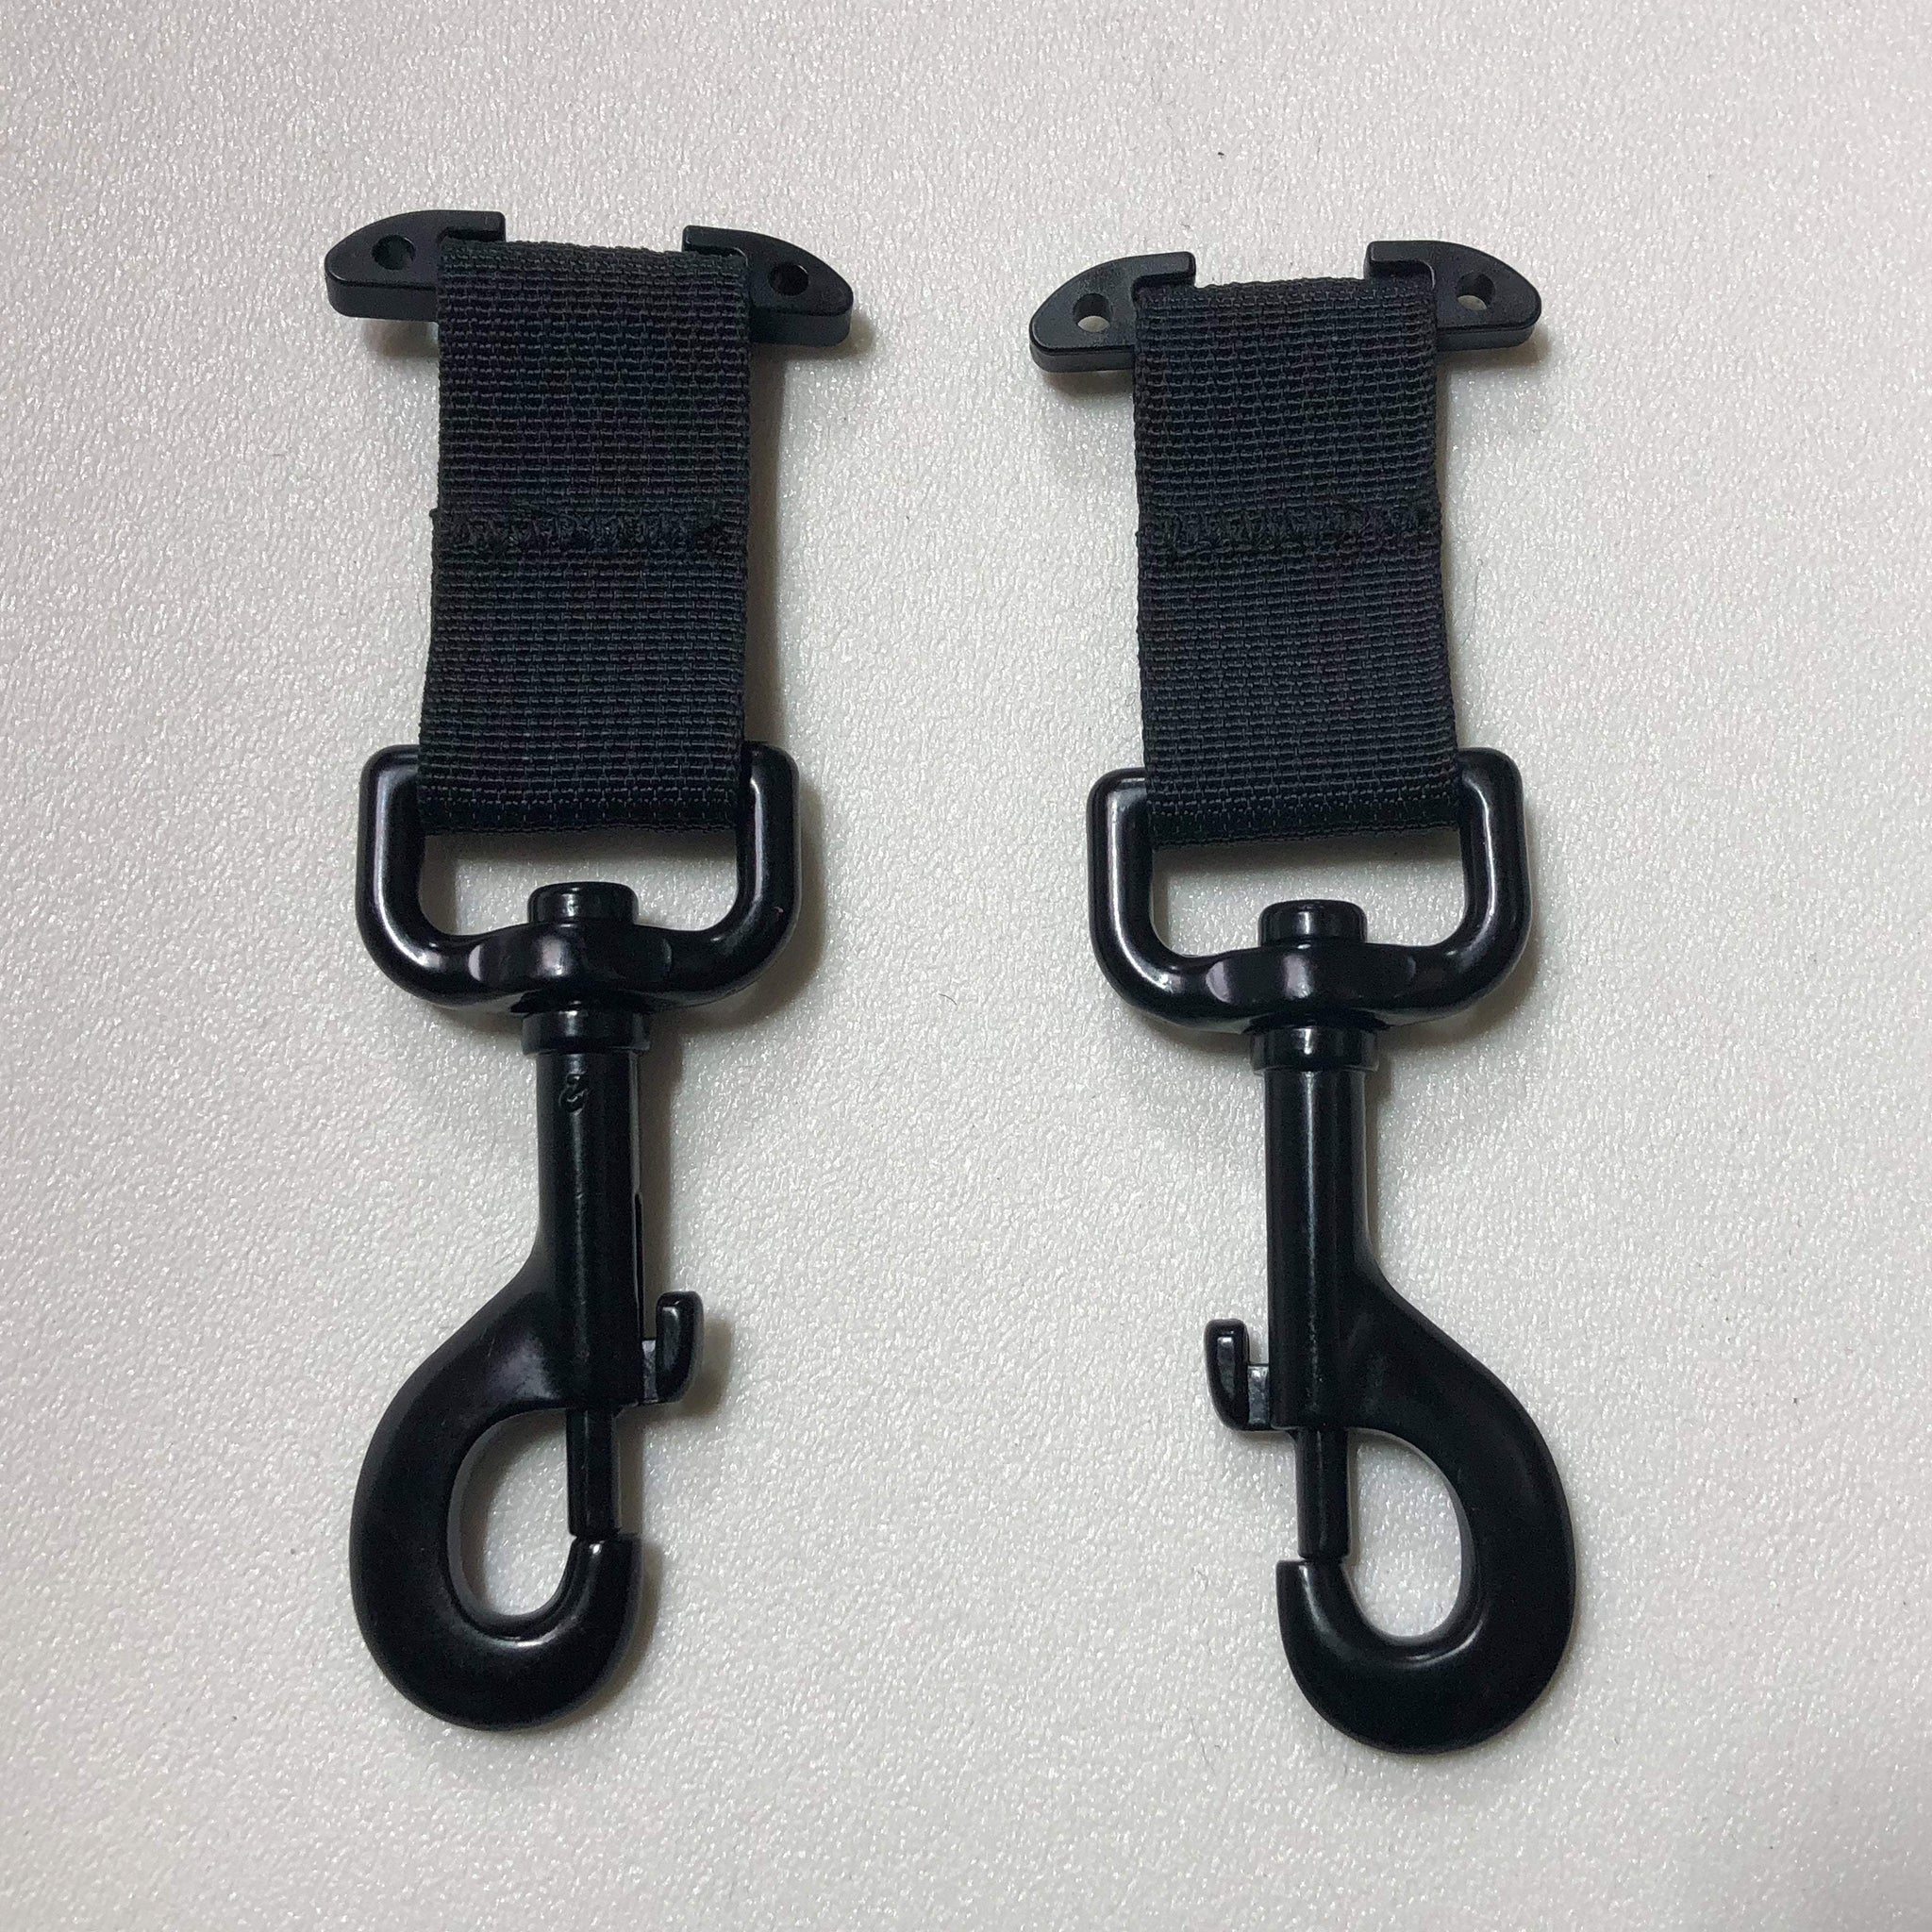 MOLLE Attachments, Bartact, PALS/MOLLE, T-Bar & Metal Swivel Hooks